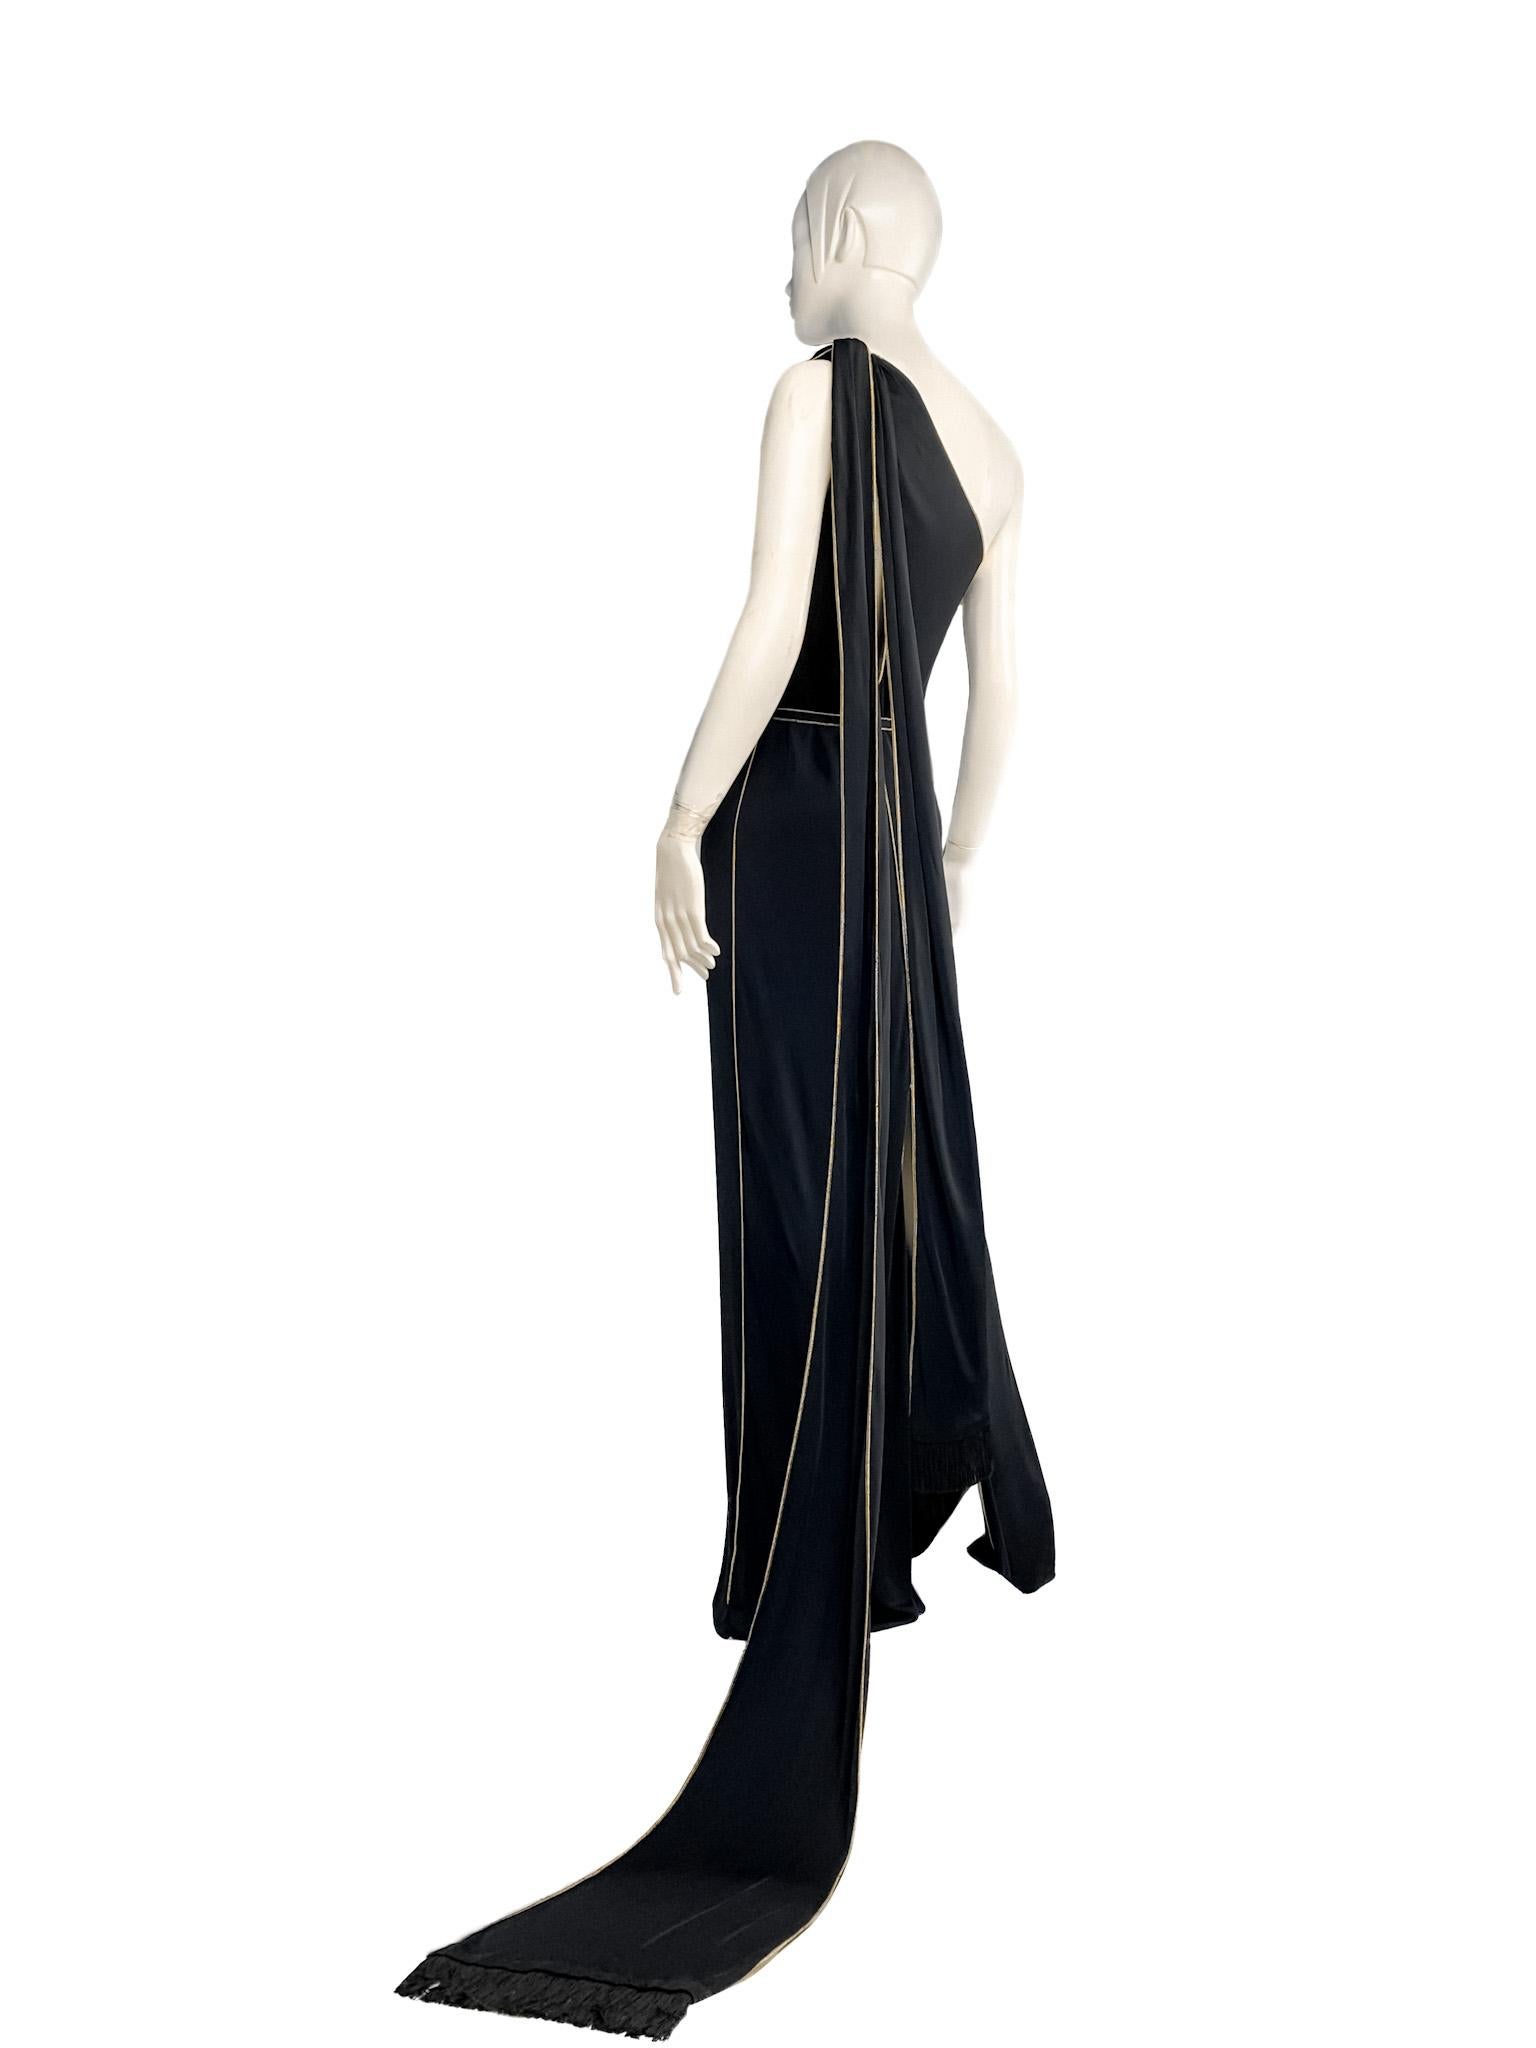 Gucci 2006 One-Shoulder Gown with Fringed Scarves/Train, Cutouts, Gold Topstitch 3